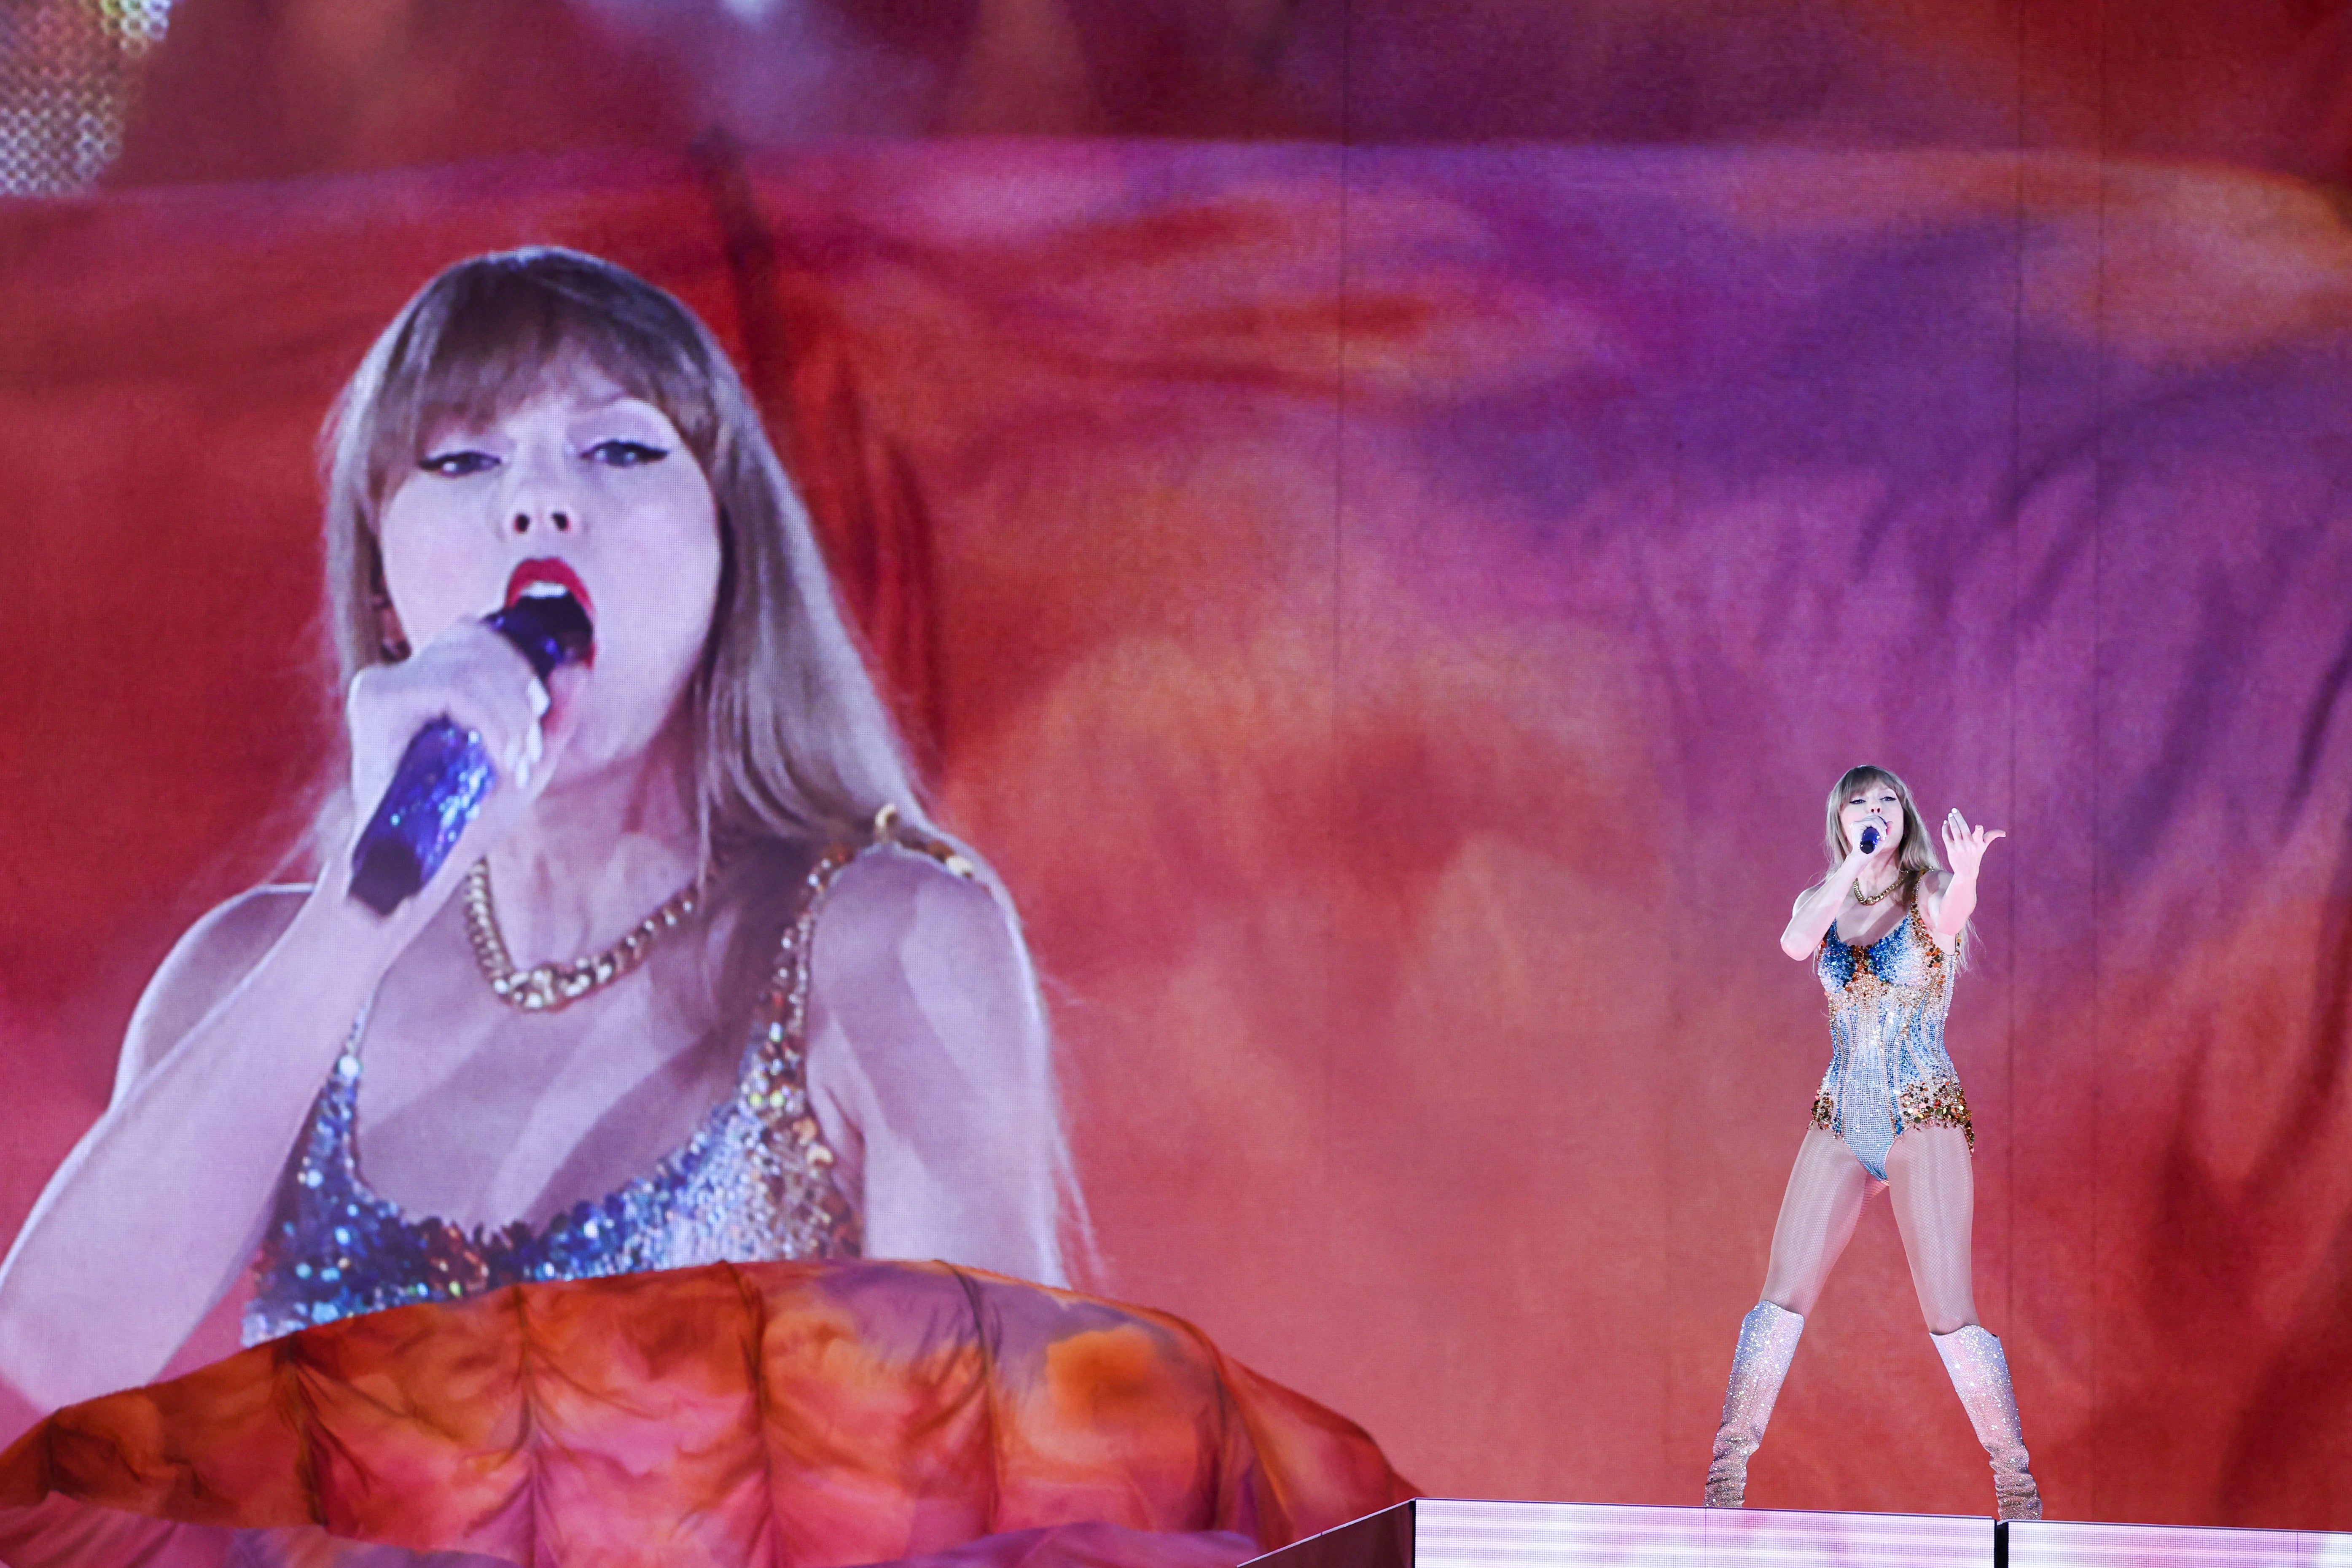 US singer Taylor Swift performs on stage during a concert as part of her Eras World Tour in Sydney